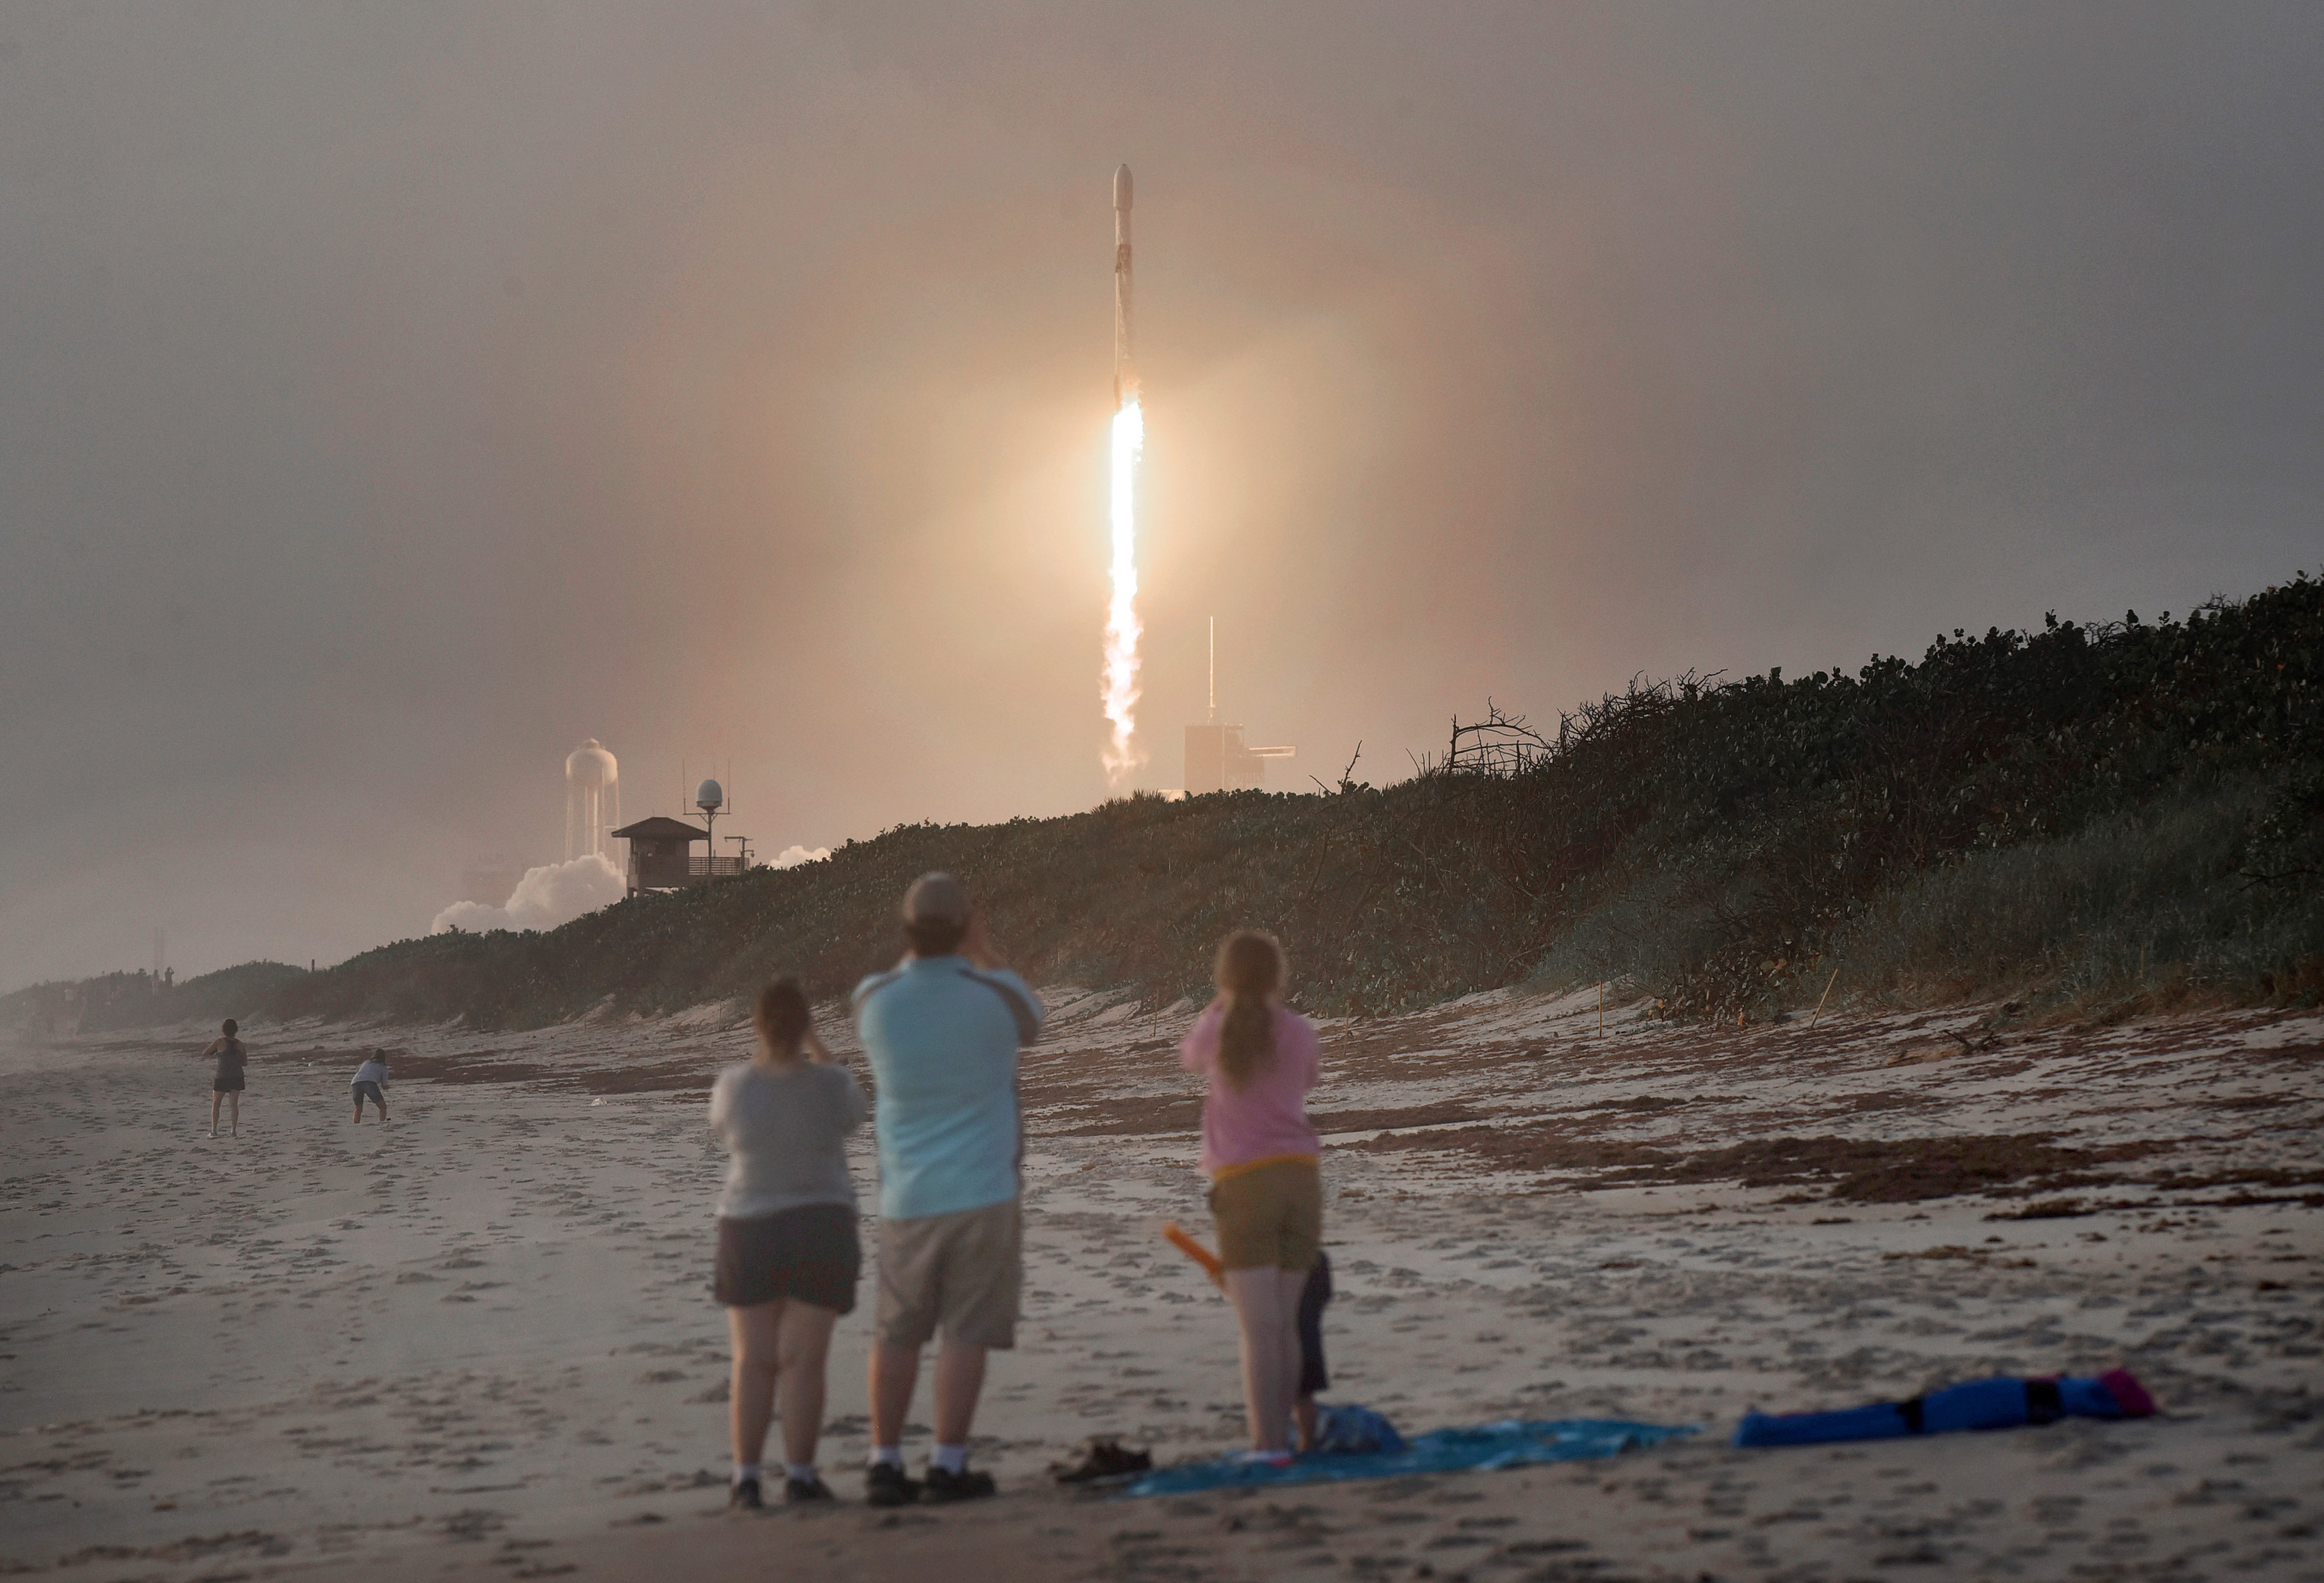 Three people stand on a beach watching a SpaceX rocket climb into the sky.